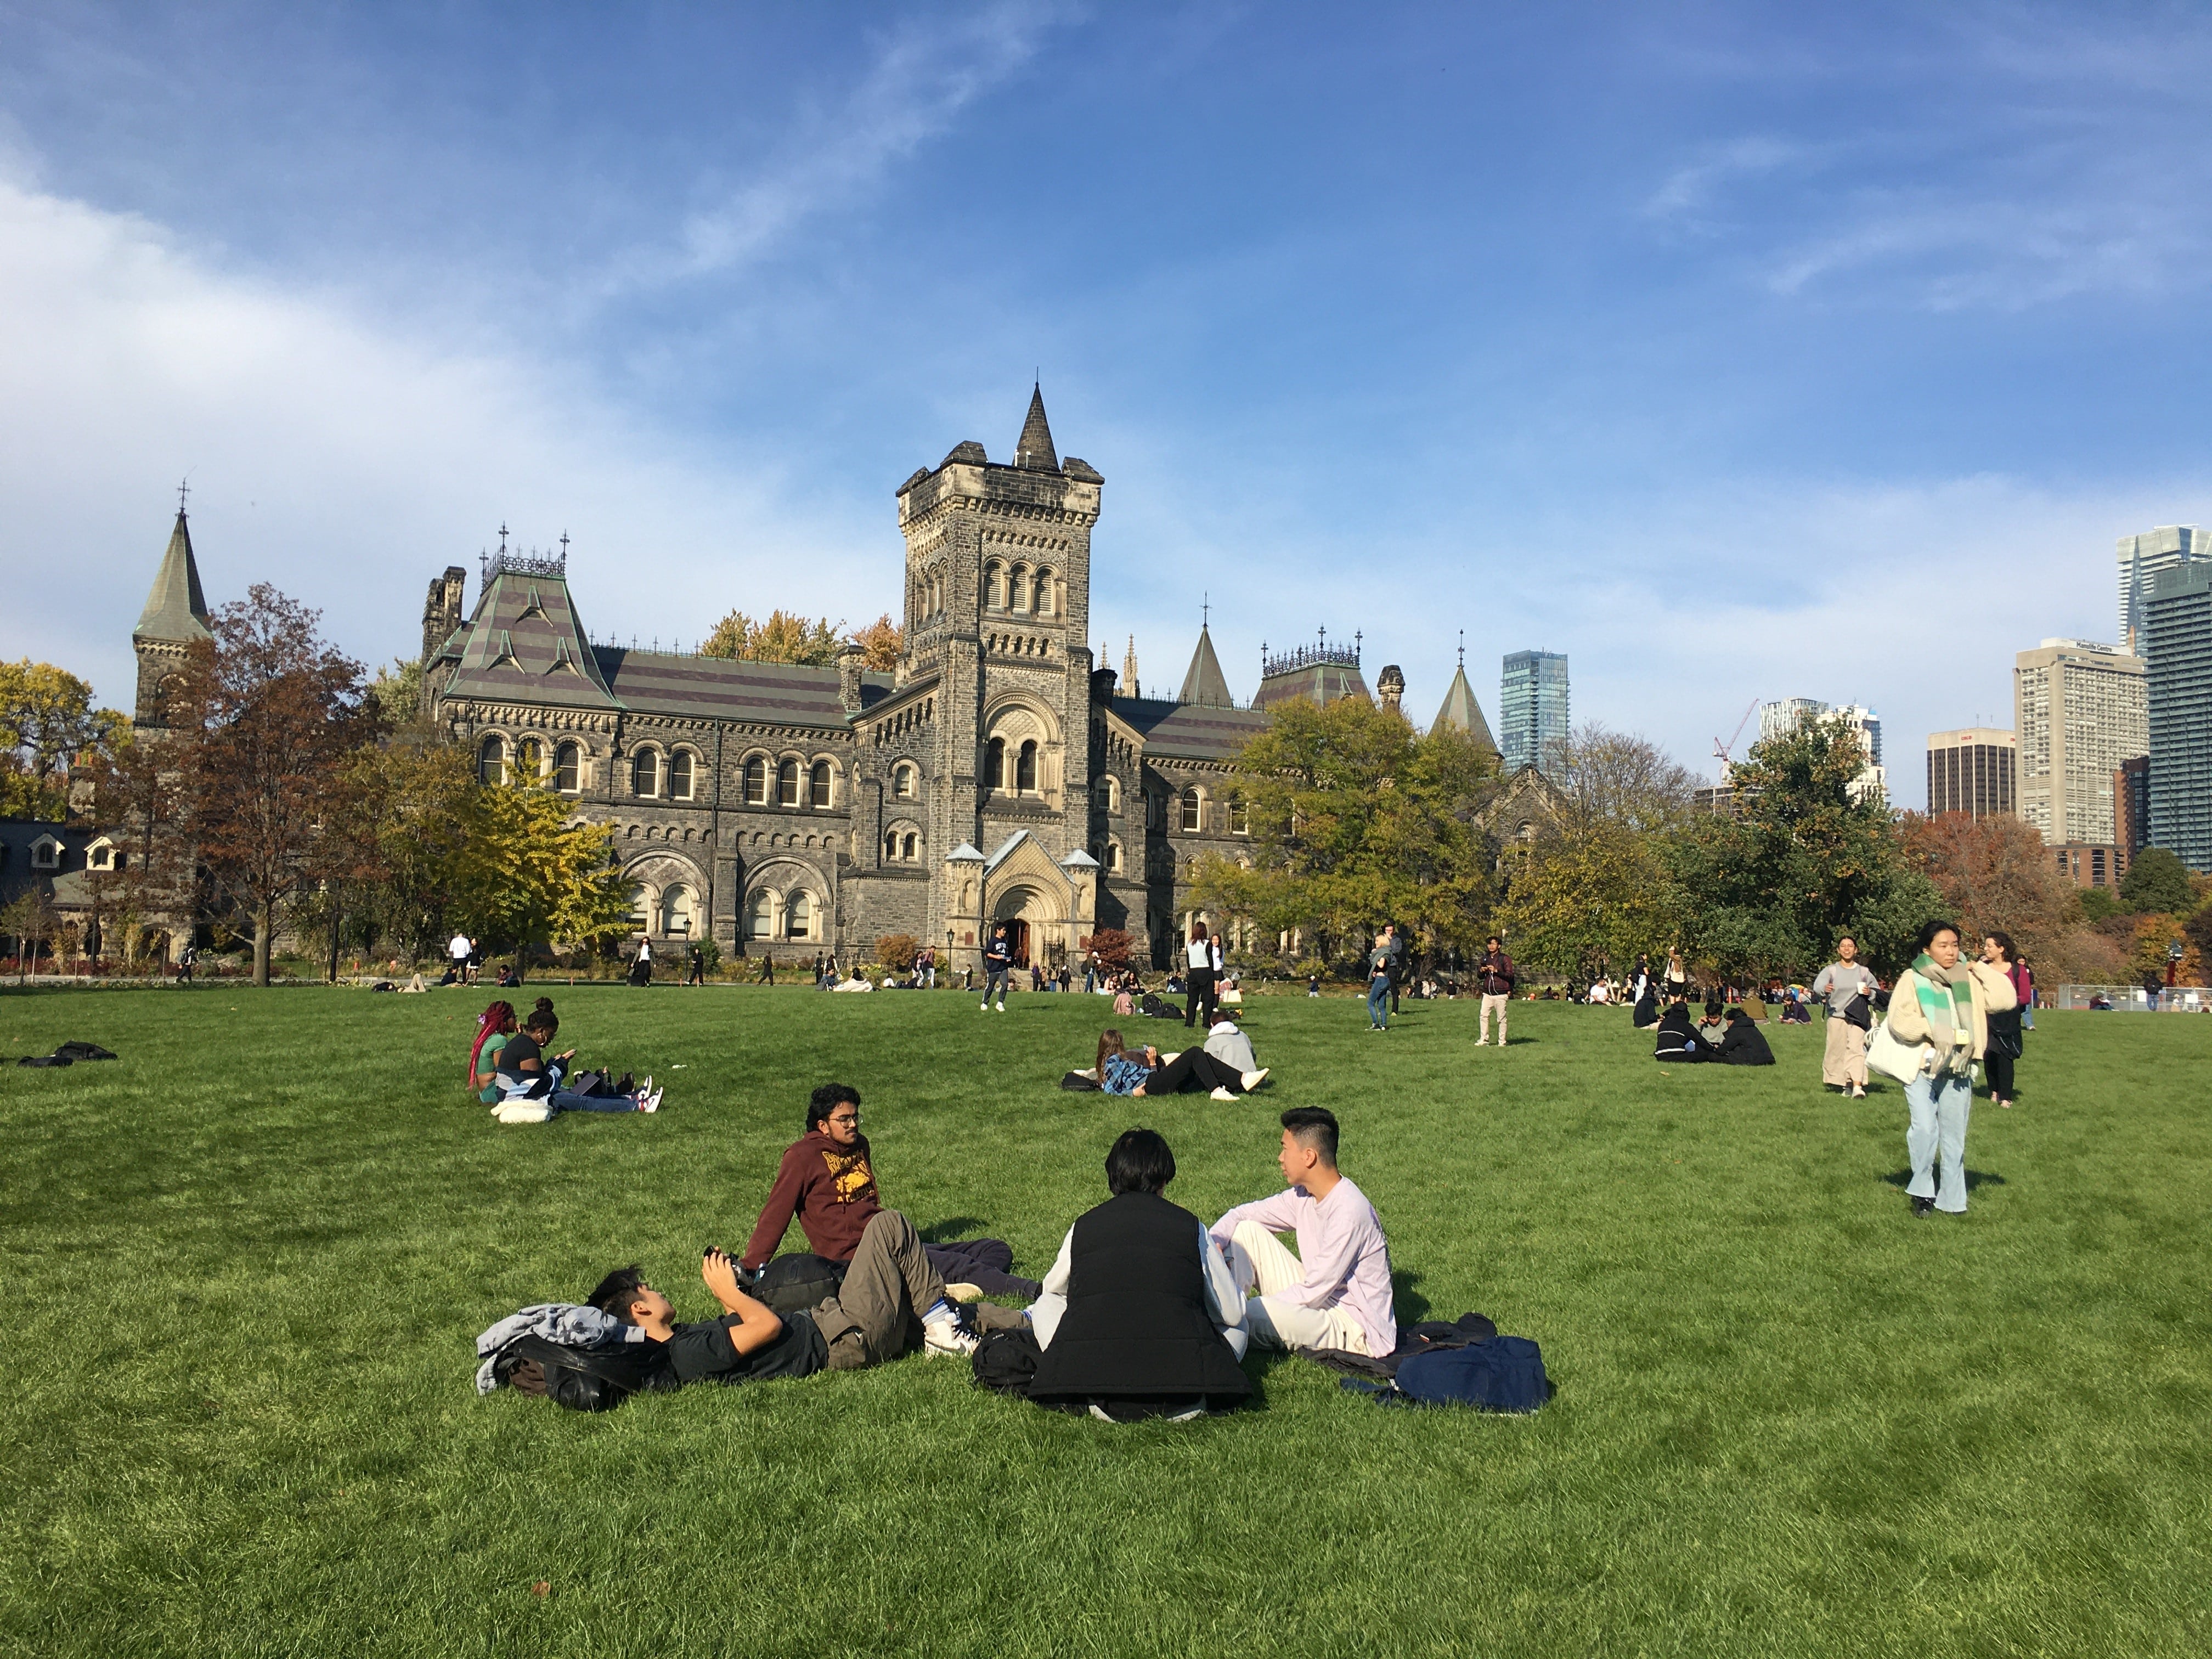 Students chatting on the field in front of University College building